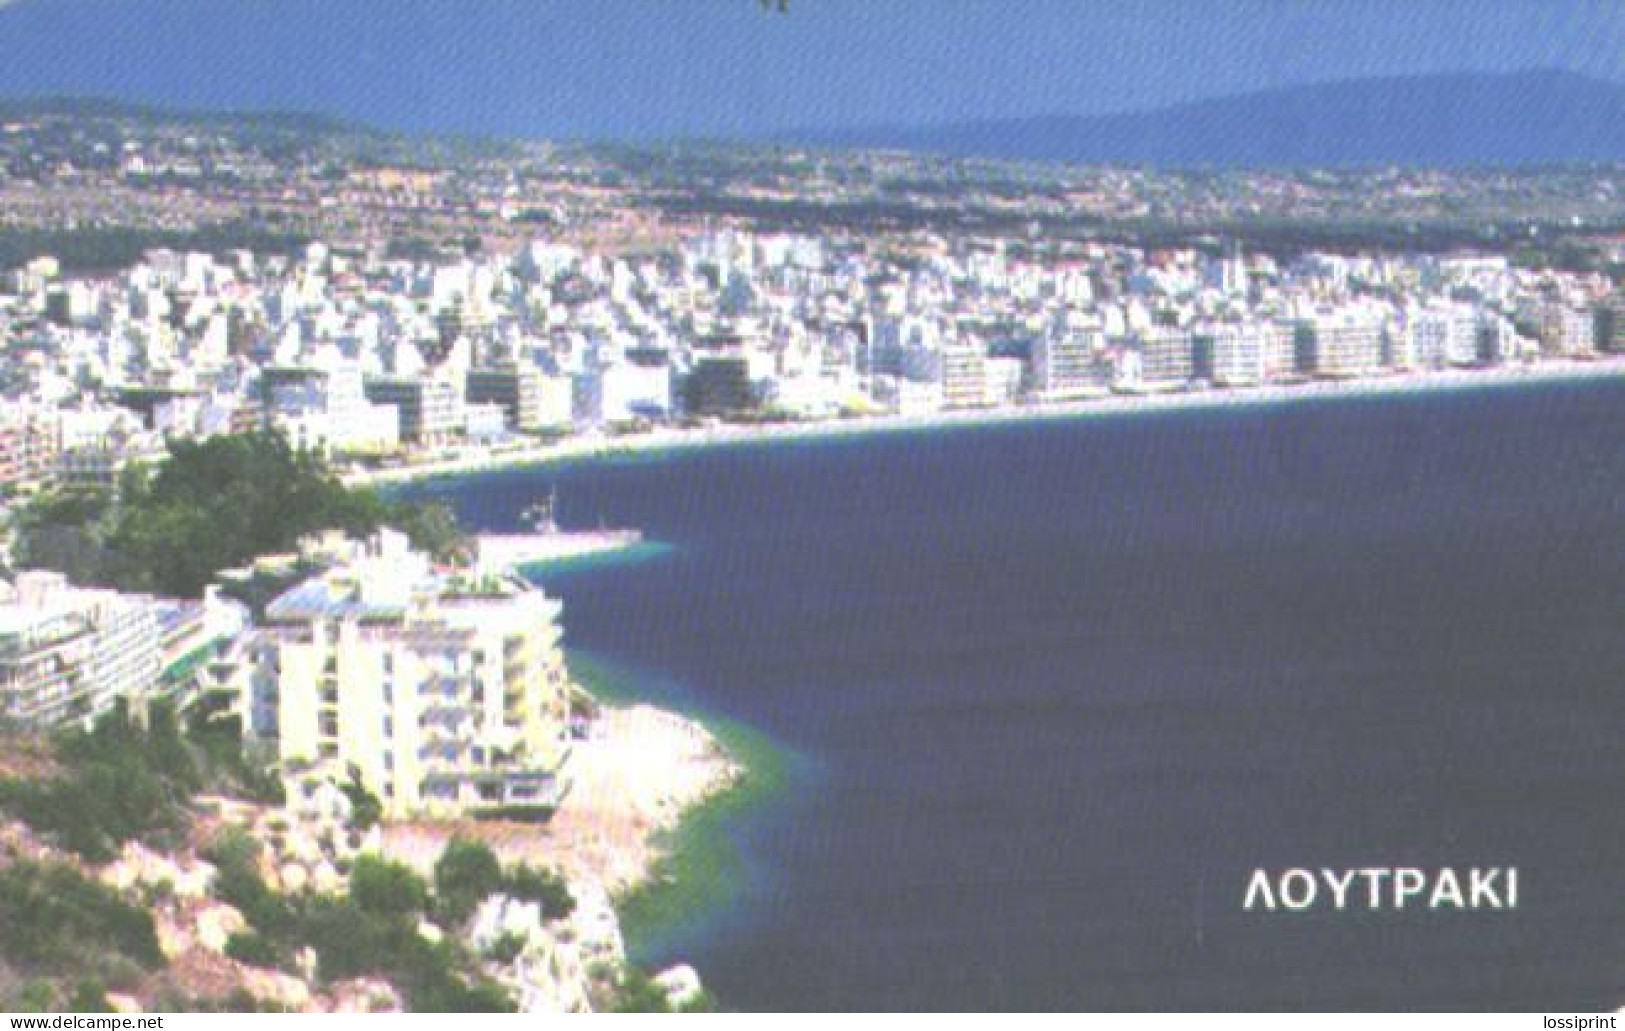 Greece:Used Phonecard, OTE, 100 Units, Hpaioy Lighthouse, Loytpaki Aerial View, 1996 - Leuchttürme